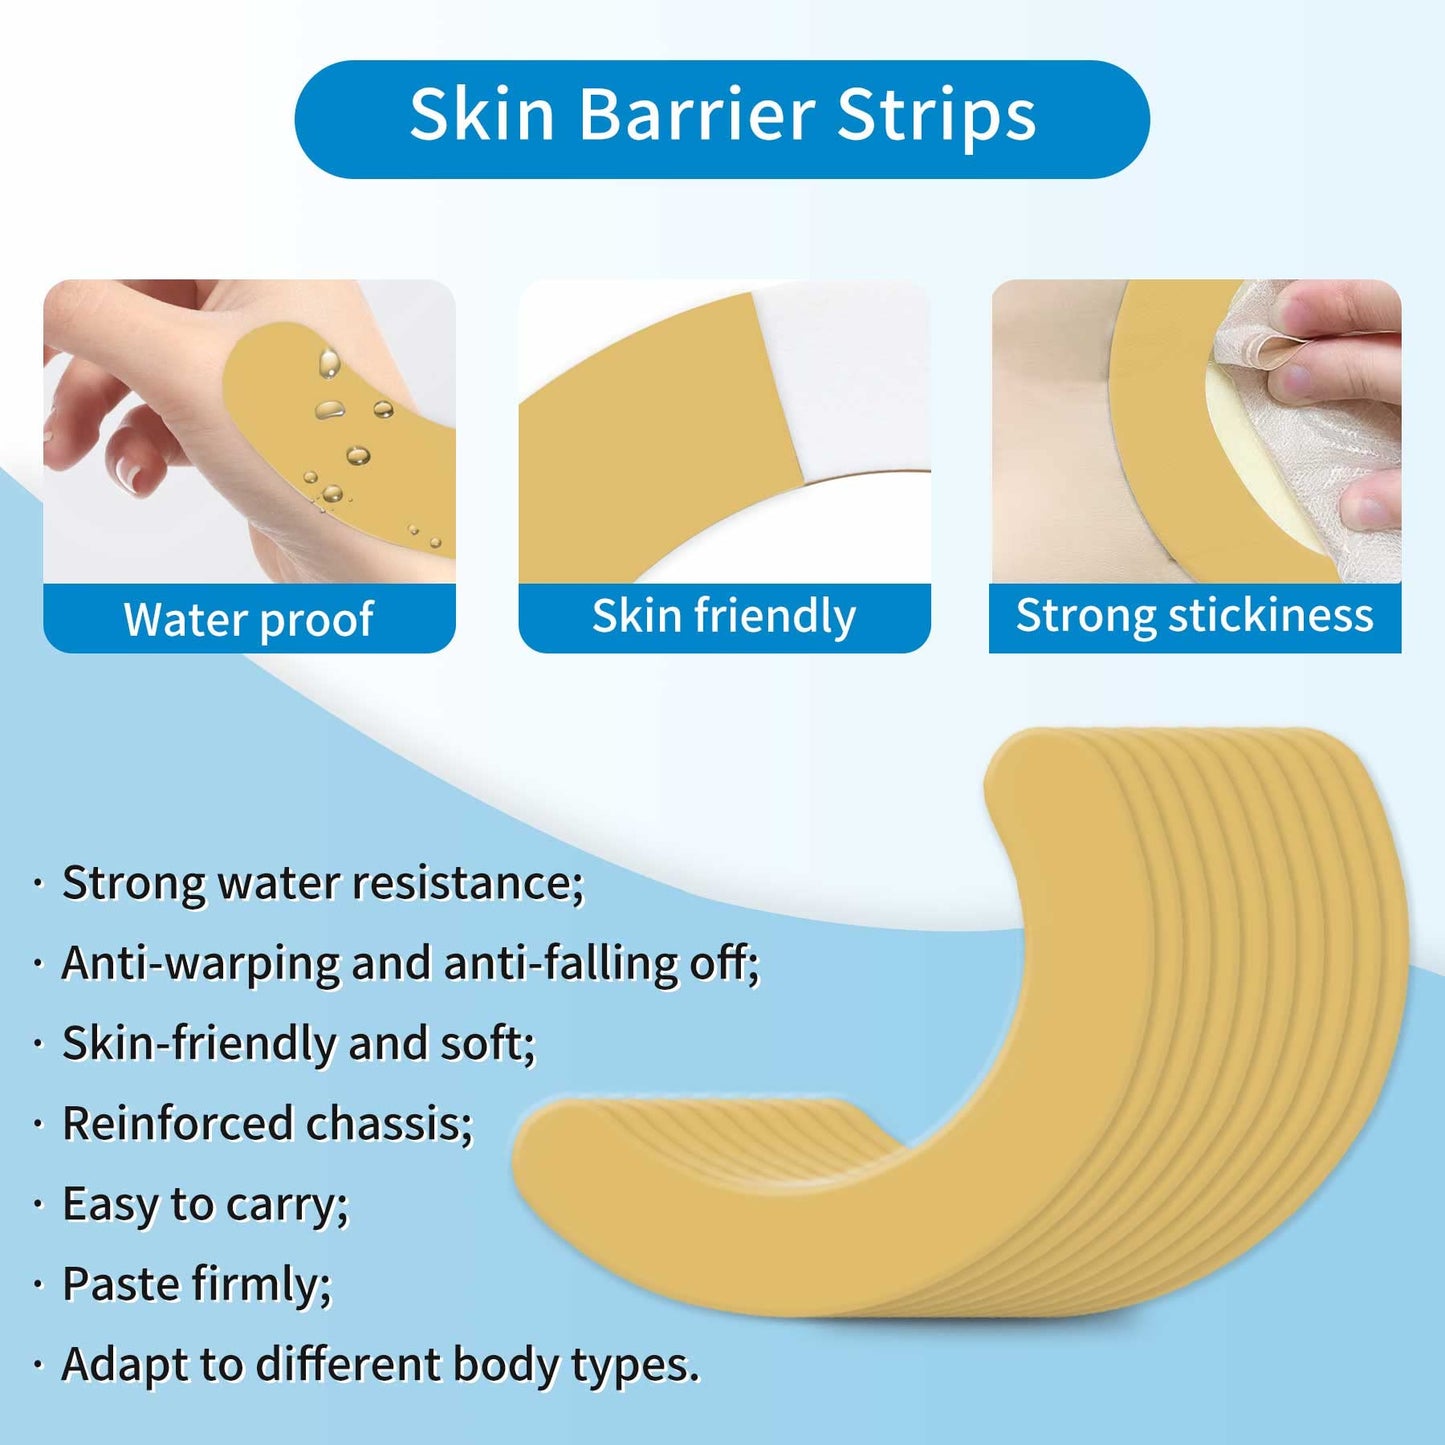 20PCS Ostomy Barrier Strips, Elastic Moldable Medical Hydrocolloid Adhesive Barrier Strips,Latex-Free Skin Barrier Strips,Hydrocolloid Ostomy Extenders,Waterproof Half Rings for Sealing Ostomy Bag